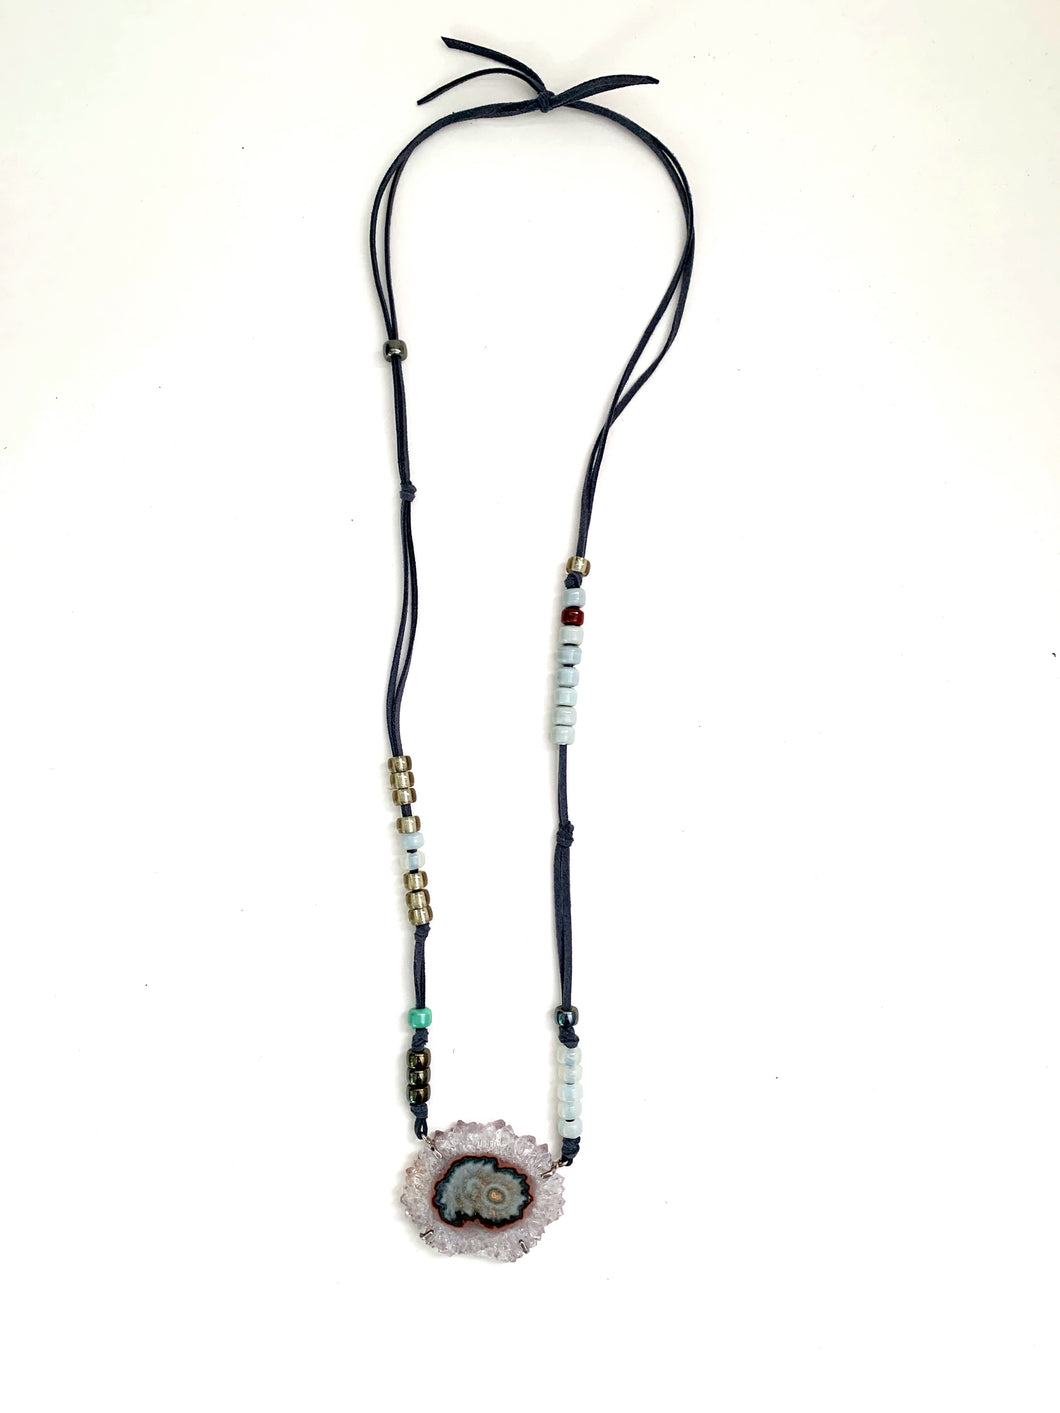 Stalactite Leather Necklace